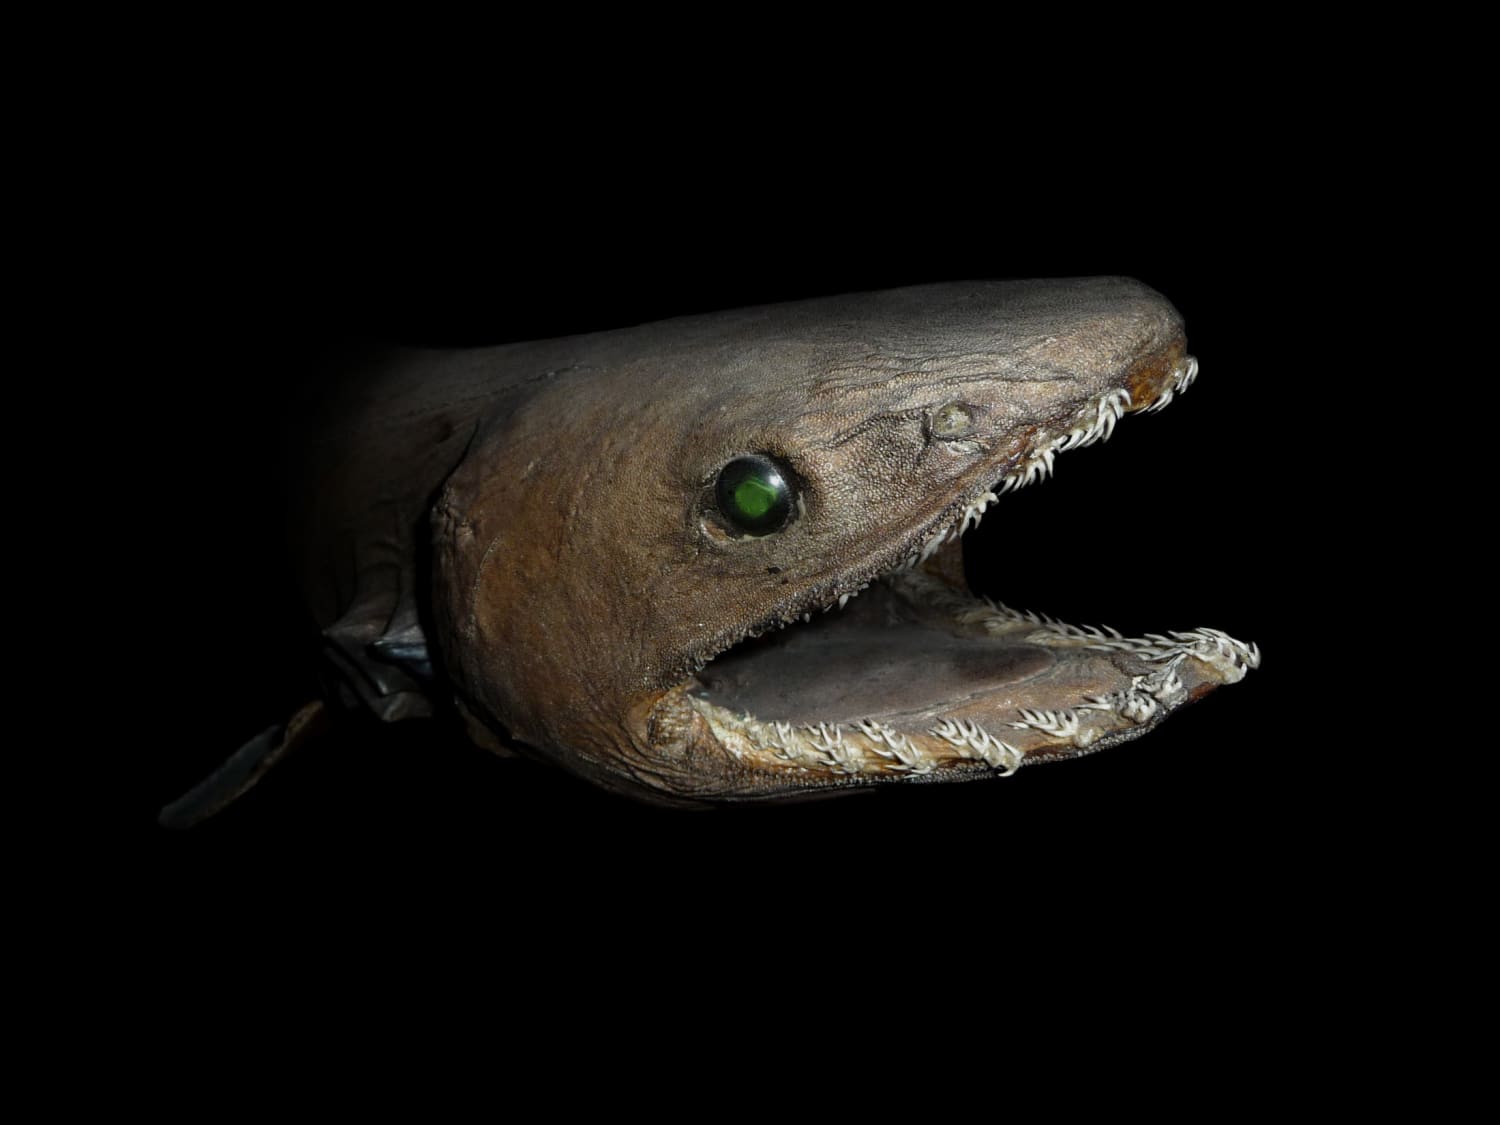 Yes, the frilled shark is really freaky. But there are other 'living fossils' that are just as weird.